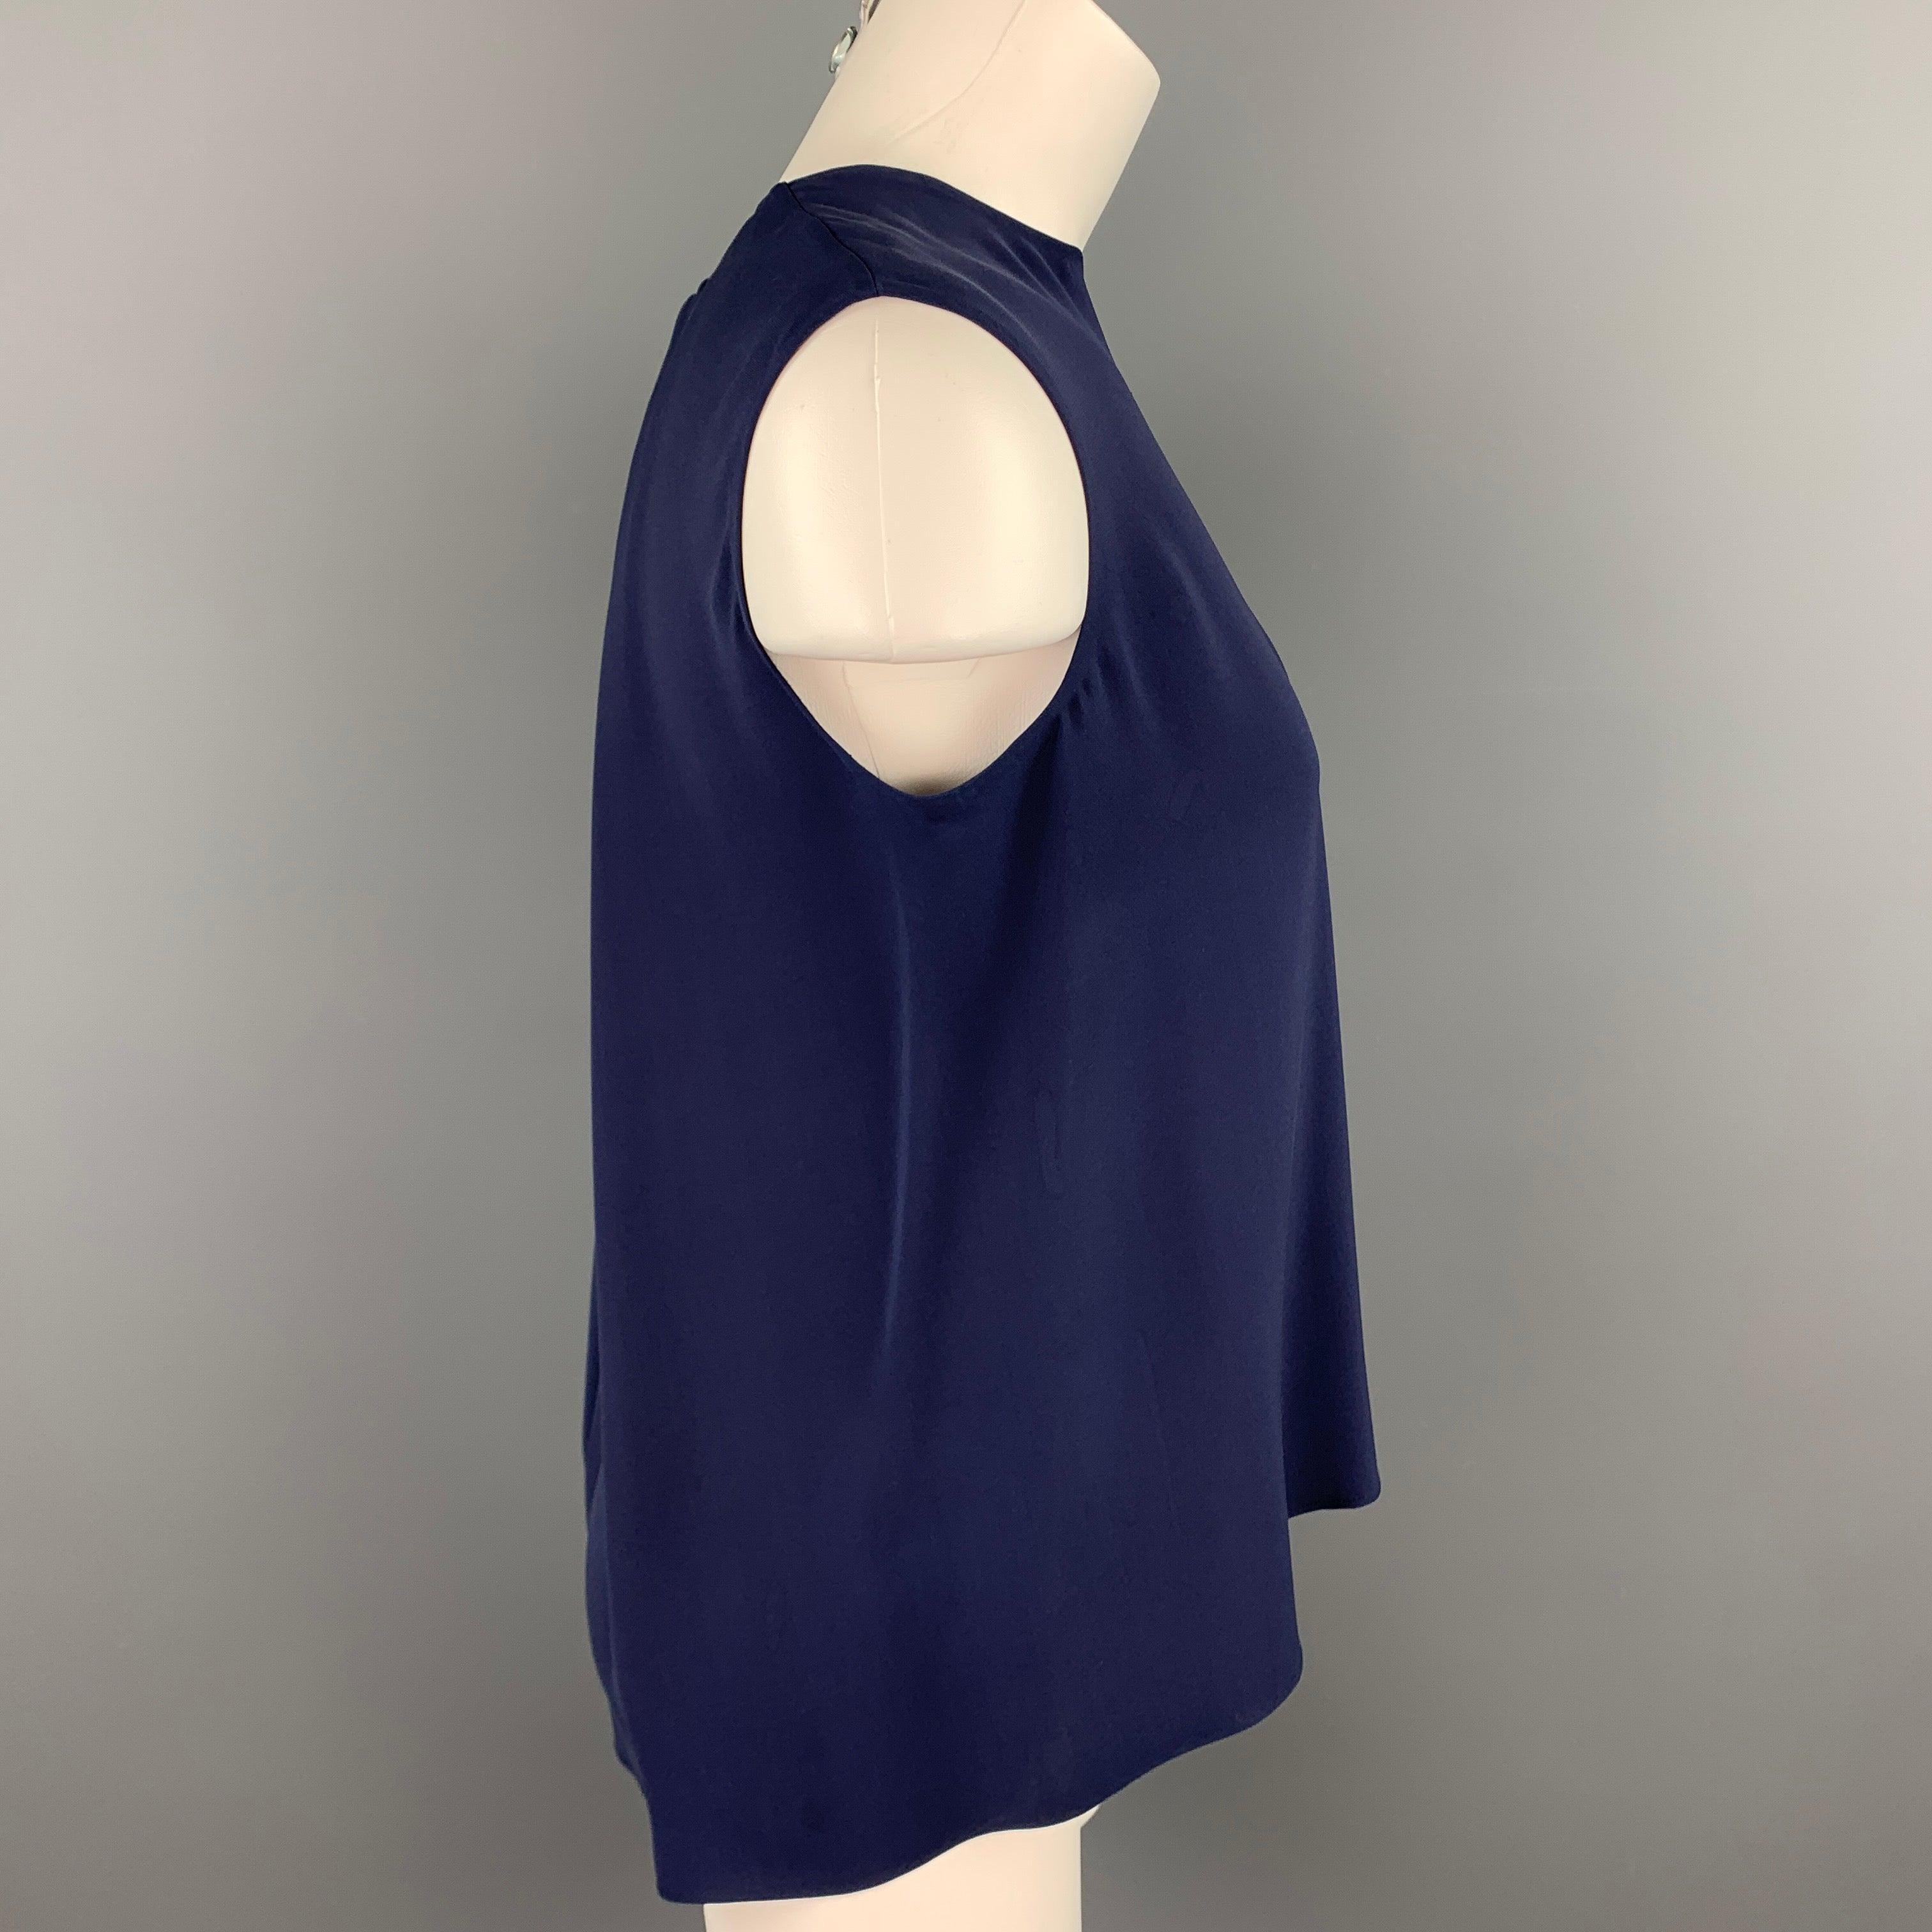 CAROLINA HERRERA sleeveless blouse comes in a navy silk featuring an asymmetrical hem and a back zip up closure.
Good
Pre-Owned Condition. 

Marked:   4 

Measurements: 
 
Shoulder: 15 inches  Bust: 36 inches  Length: 24.5 inches 
  
  
 
Reference: